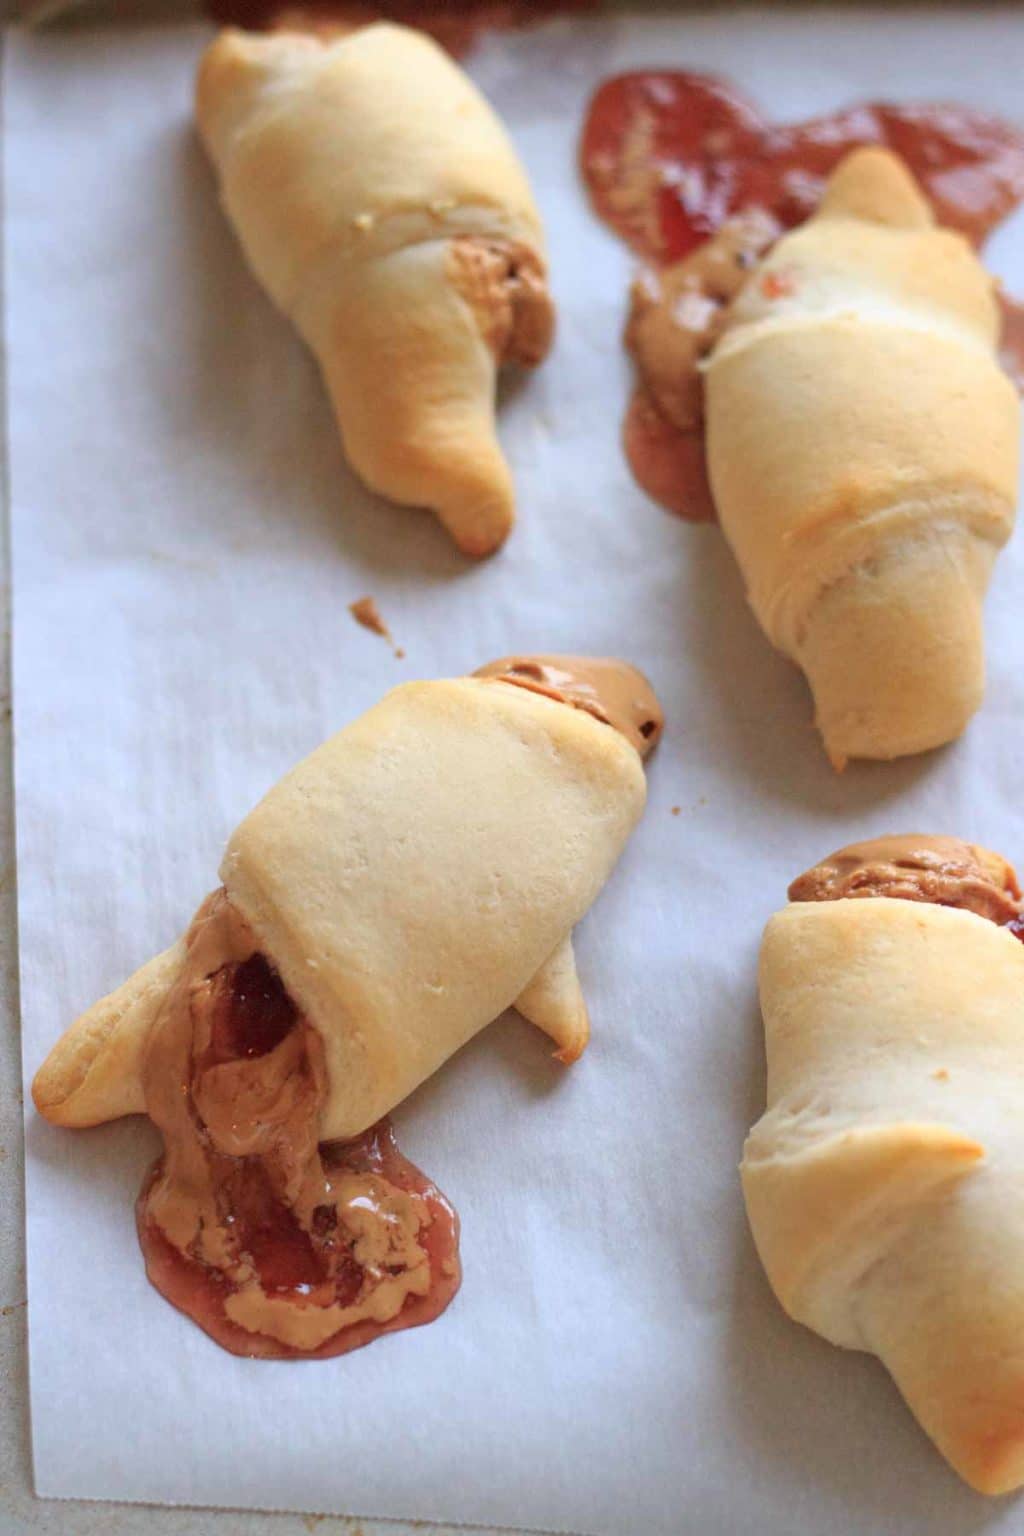 Peanut butter and jelly wraps with filling oozing out on parchment paper